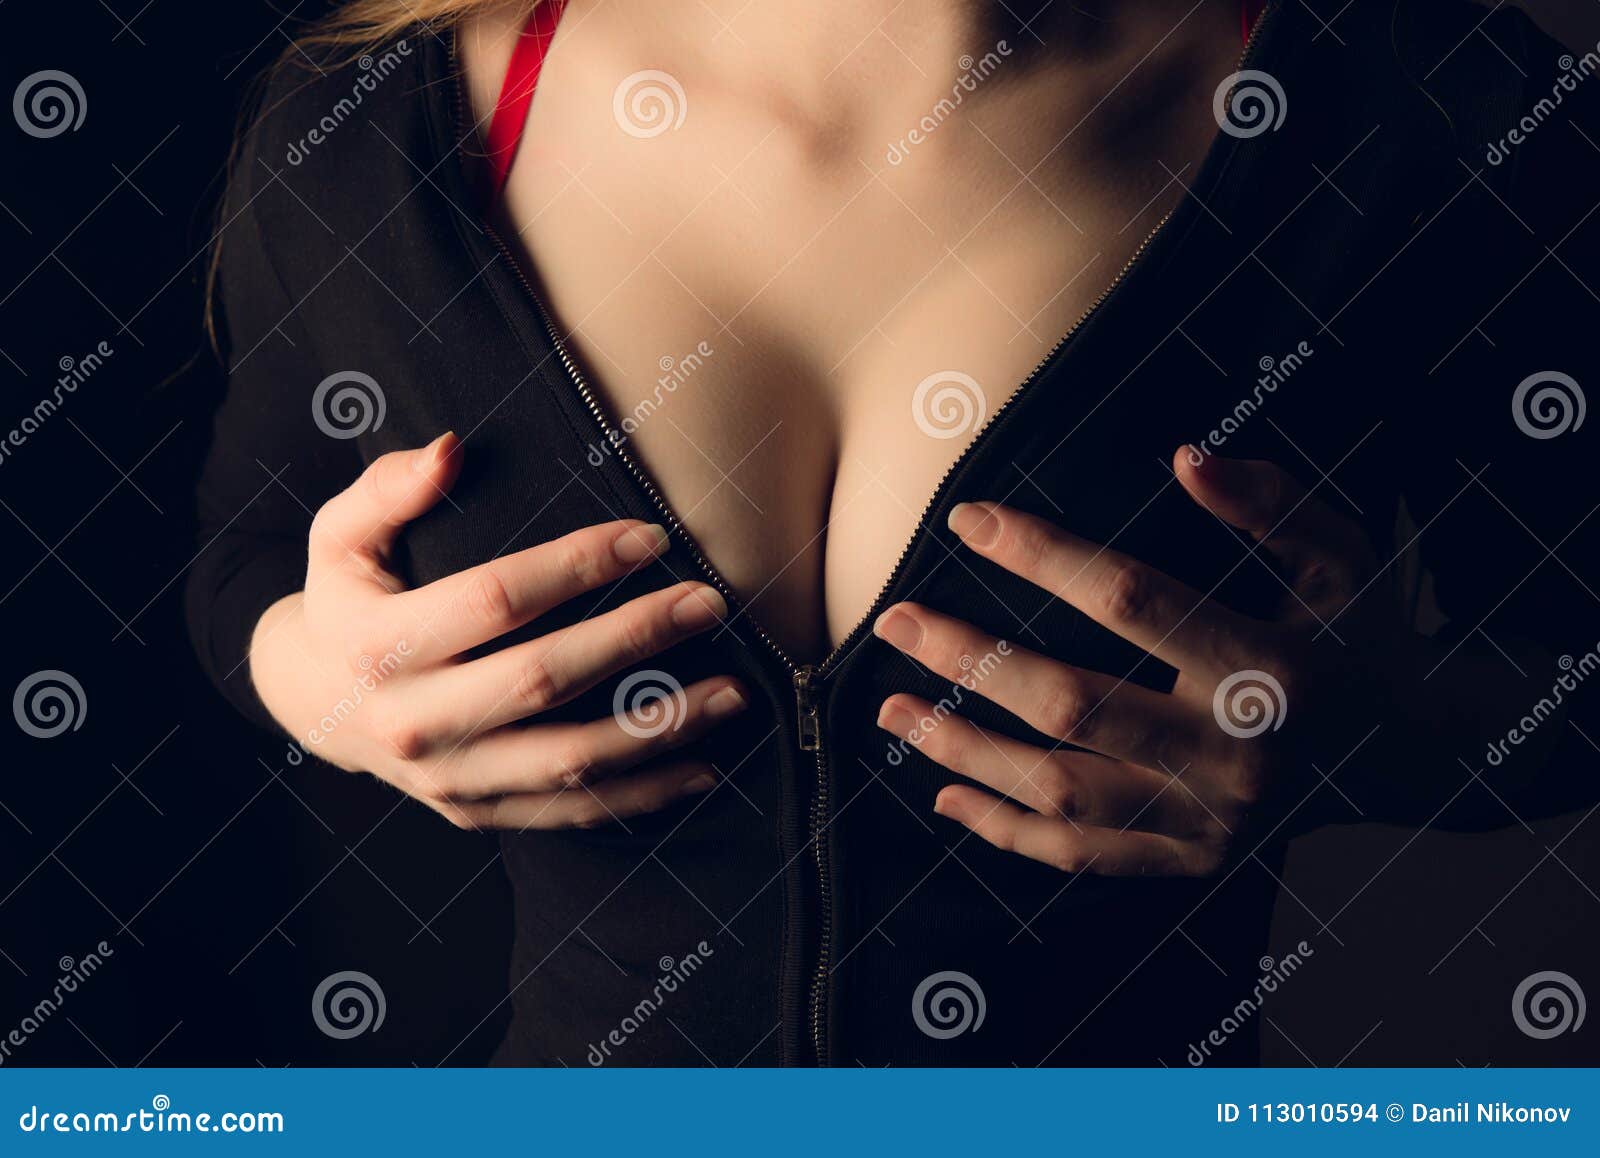 Woman Tits in Black Jacket. Stock Photo - Image of babe, black